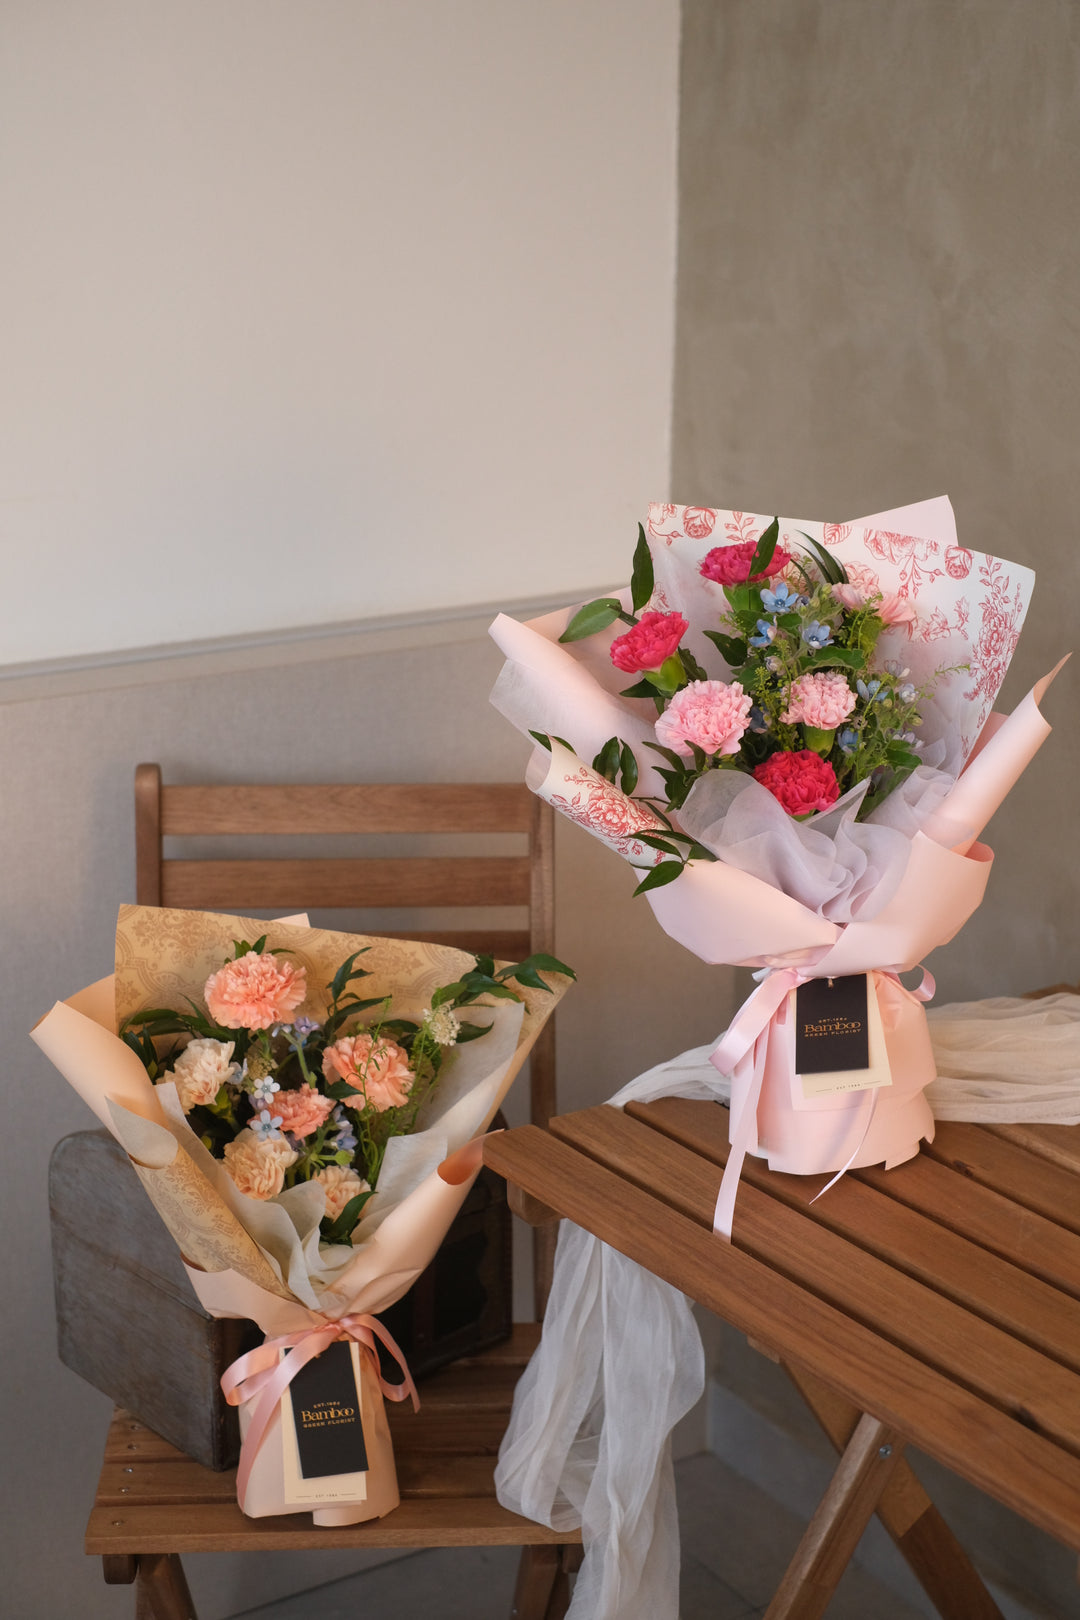 An elegant bouquet of assorted flowers, including carnations, roses, and lilies, arranged in a vase. The vibrant colors and delicate blooms convey love, gratitude, and appreciation for mothers and mother figures.